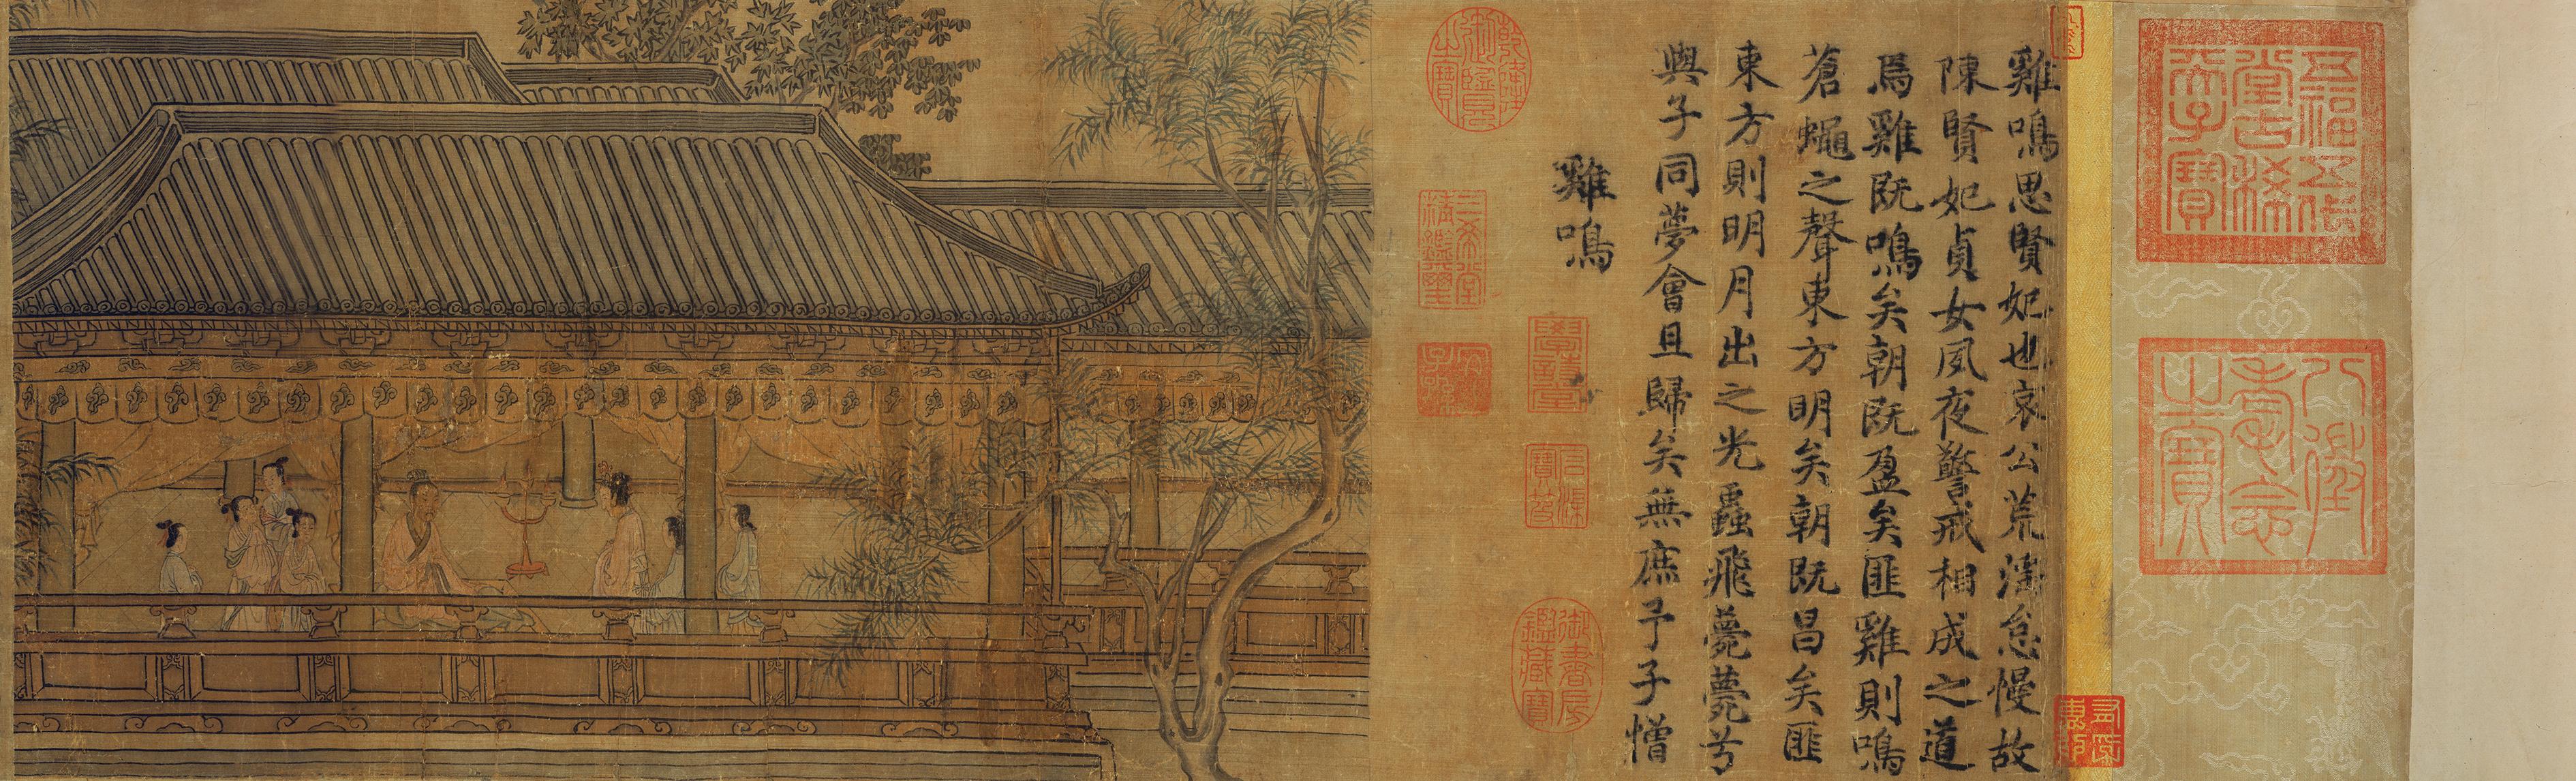 The "Illustrations for the Odes of Qi", an handscroll in ink and colour, from the Xubaizhai Collection of the Hong Kong Museum of Art is attributed to the Southern Song artist Ma Hezhi, based on the Book of Odes (Shi Jing). It conveys moral values through the pairing of poems with illustrations, carrying deep meaning.  Photo shows "Illustrations for the Odes of Qi (section)" .